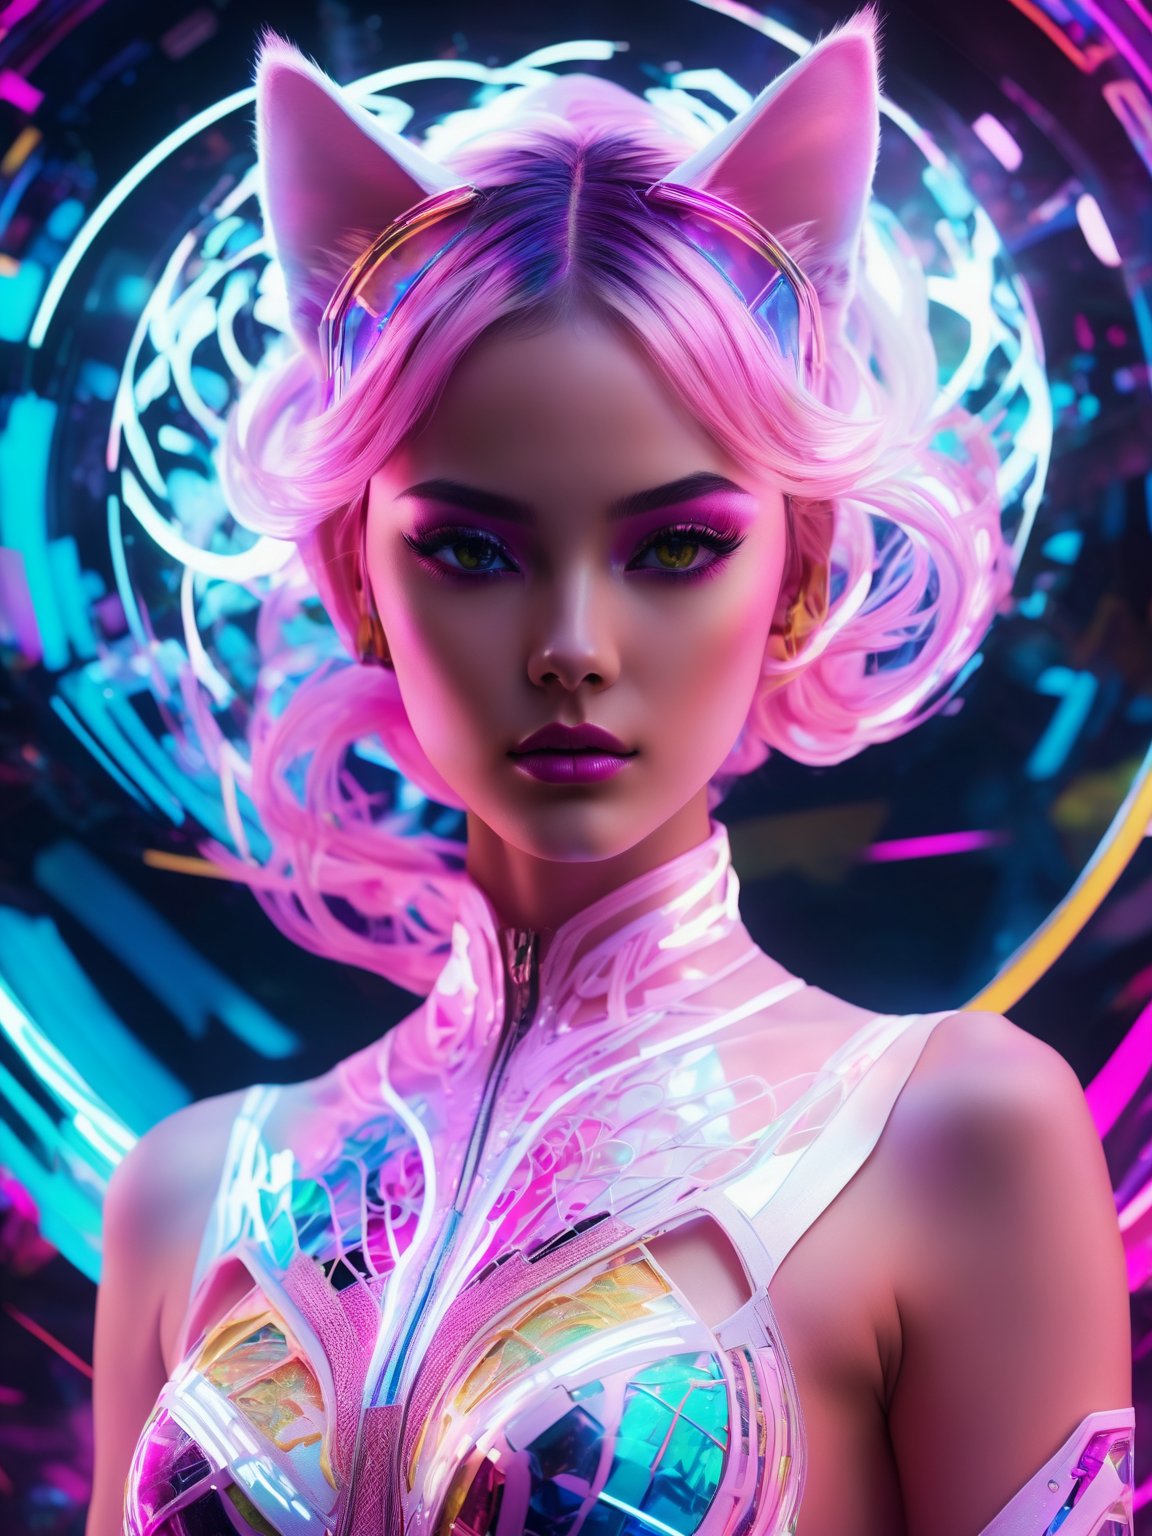 (best quality,8K,highres,masterpiece), ultra-detailed, (super colorful, vibrant), depiction of the most beautifully exotic 19-year-old Italian woman, deeply passionate about manga comics. She is portrayed in a neon white and pink futuristic lace cat bodysuit with stockings cutouts, a captivating costume, high heel boots, and stiletto heels, all bursting with a riot of vivid colors. She radiates an aura of creativity, symbolizing a triumphant victory over restriction and norm. The cyberspace around her is filled with bright, hypnotic patterns, and a radiant halo of multi-colored light envelops her. Scattered code fragments disintegrate and spiral into the void, forming a dazzling and imaginative spiral. The scene features razor-sharp focus, epic and complex projections of ghostly translucent fabric, glowing hollow cybernetic threads, and a dynamic anime-style pose with swirling light particles. This stunning visual masterpiece includes double exposure, a kaleidoscope of glowing textures, vivid black tones, a surreal atmosphere, and a vibrant color filter that brings the entire composition to life in a dazzling spectrum of colors.